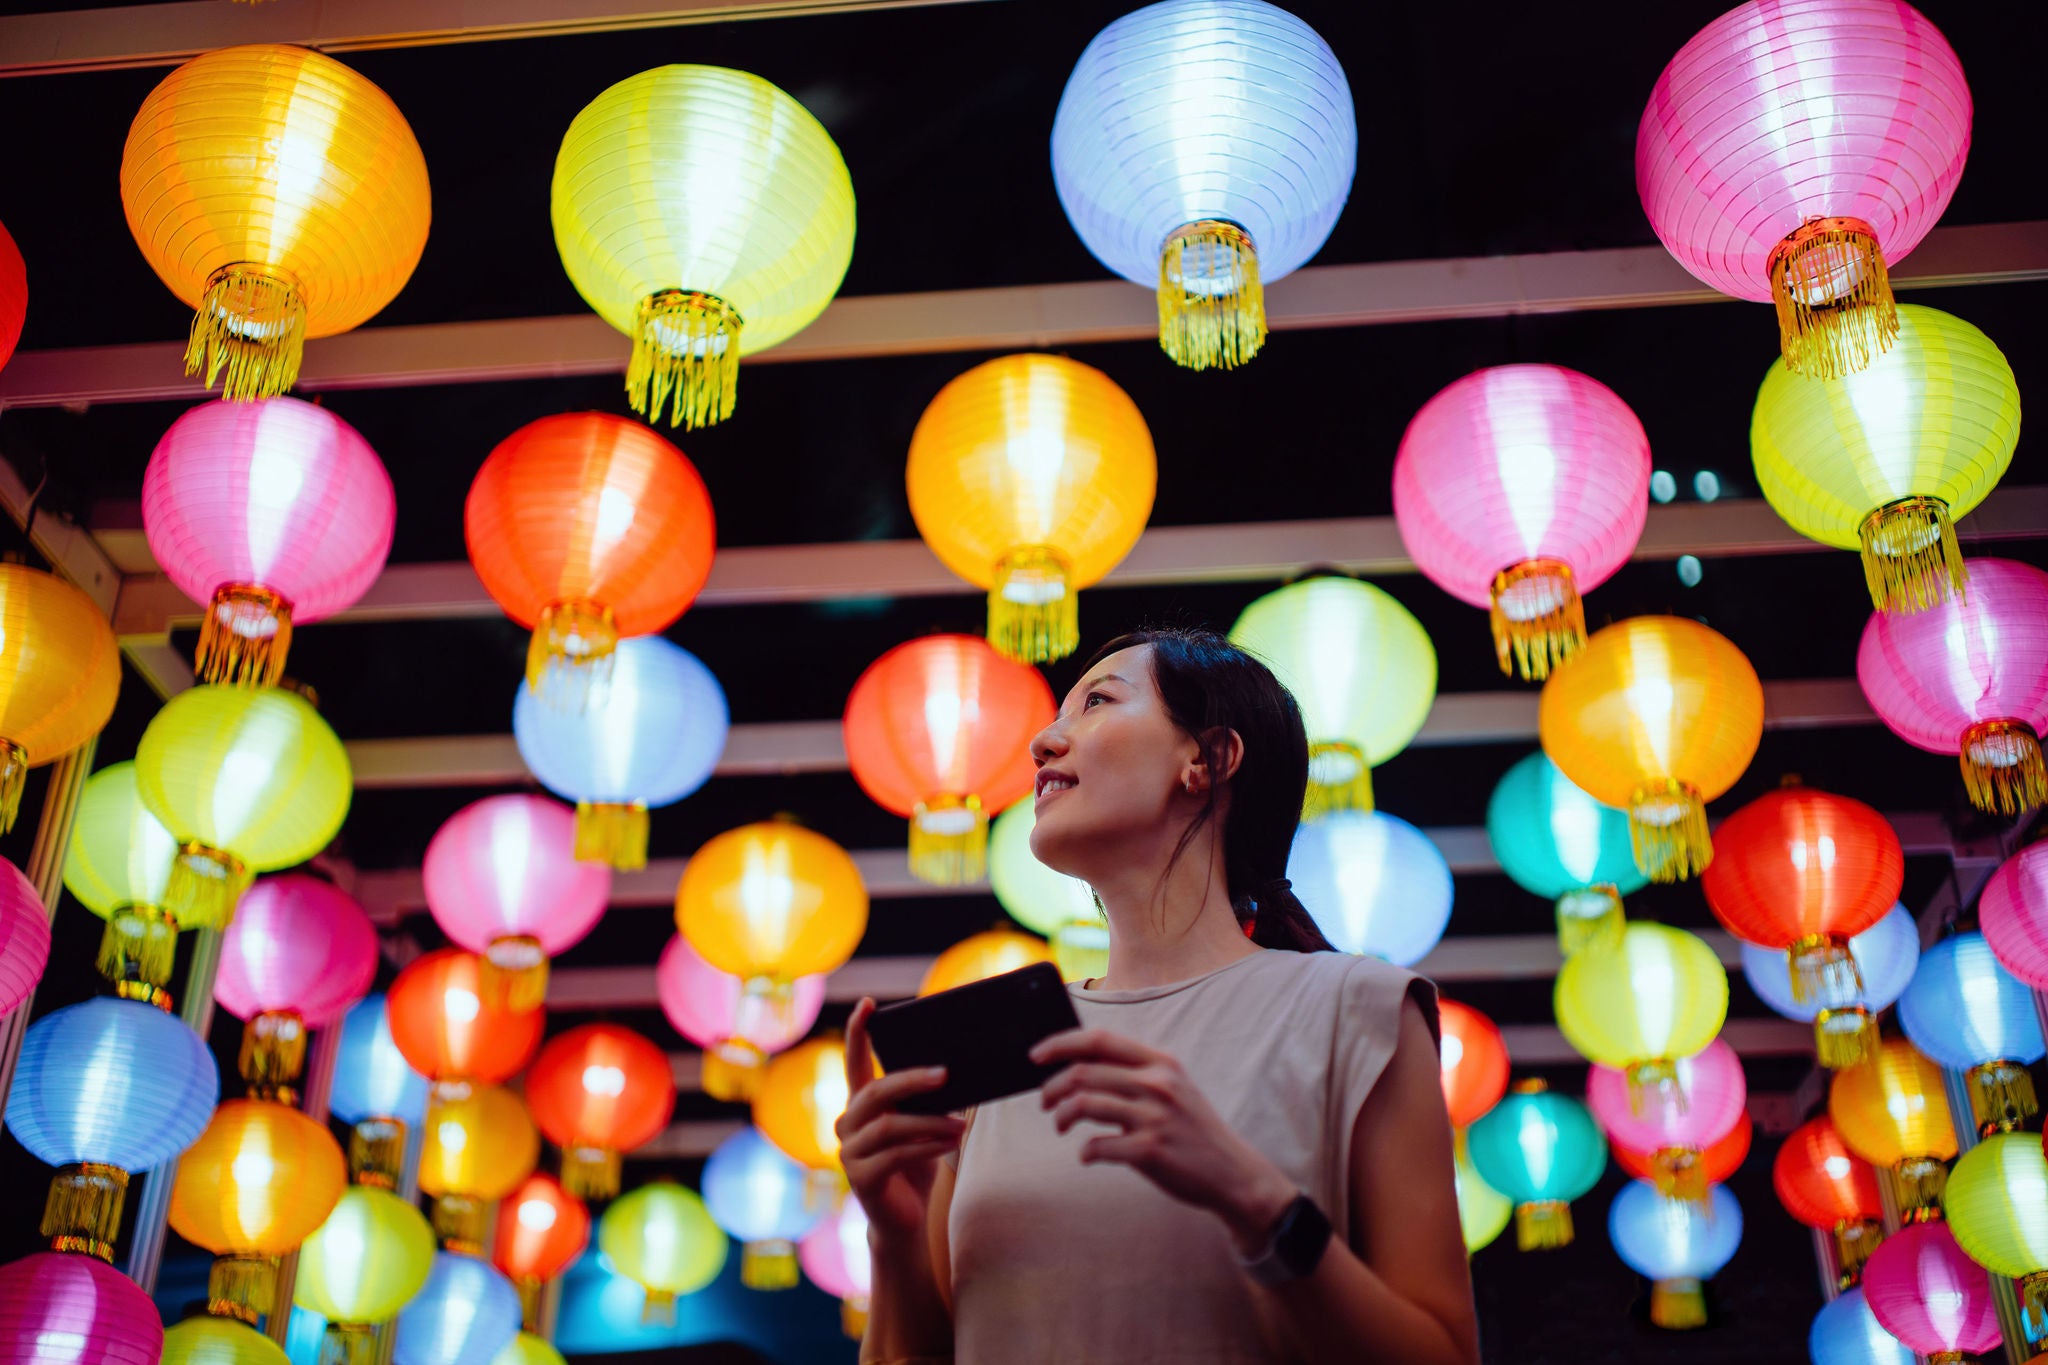 Smiling young Asian woman taking photos of illuminated and colourful traditional Chinese lanterns with smartphone hanging on city street at night. Traditional Chinese culture, festival and celebration event theme